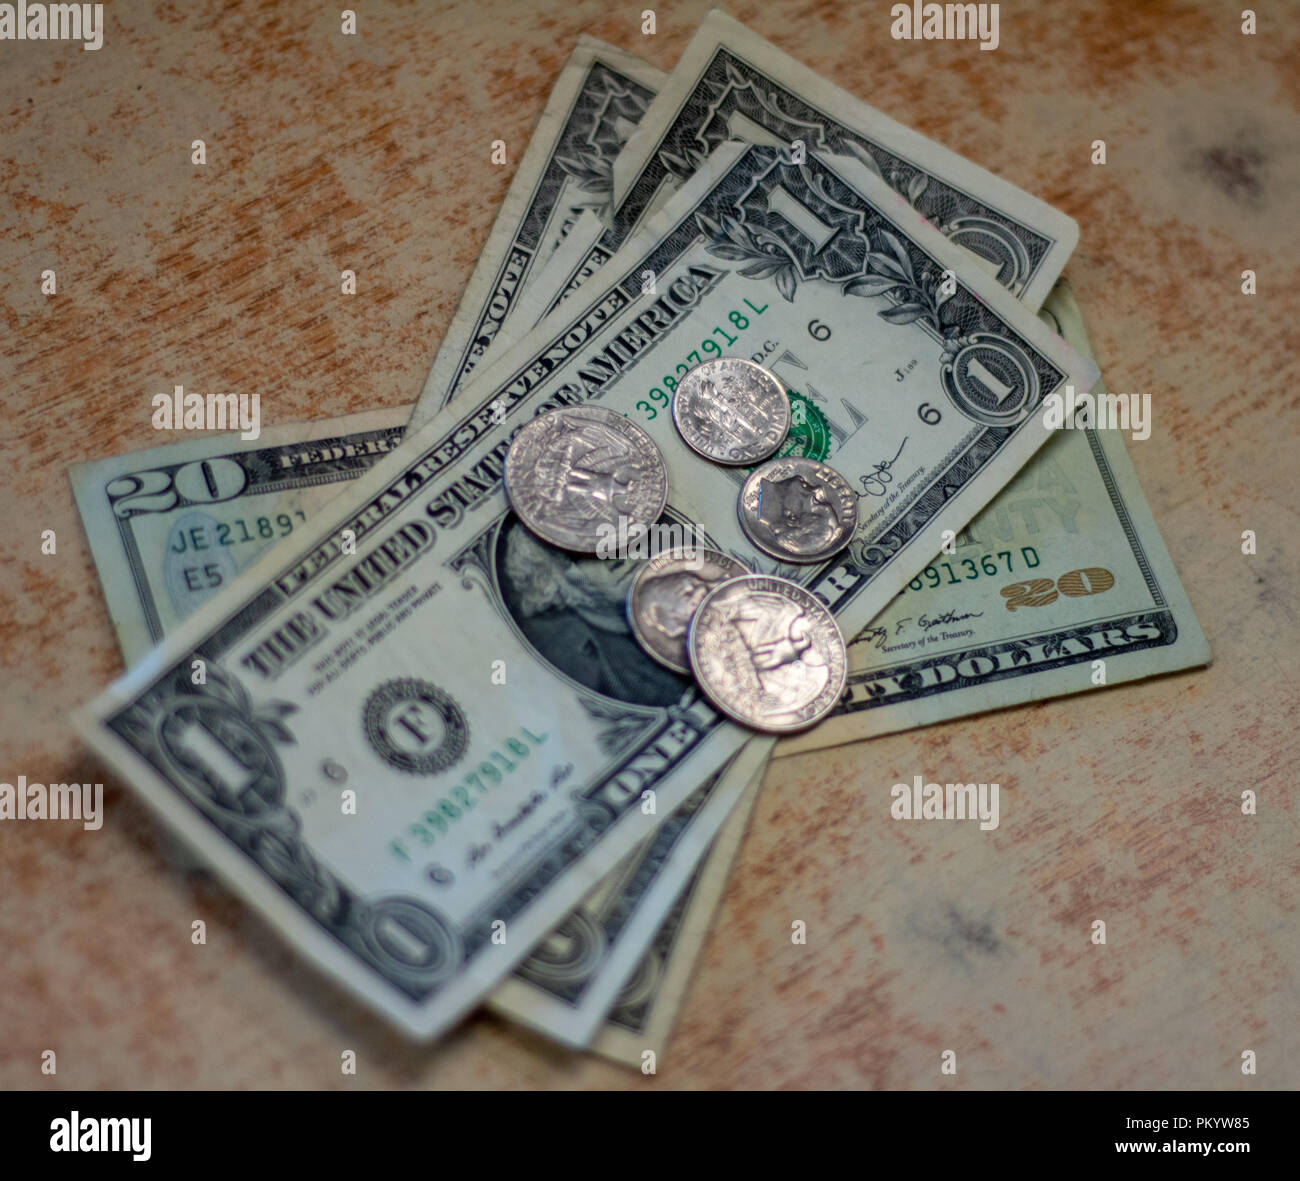 U.S. currency bills and change. money on table. Stock Photo